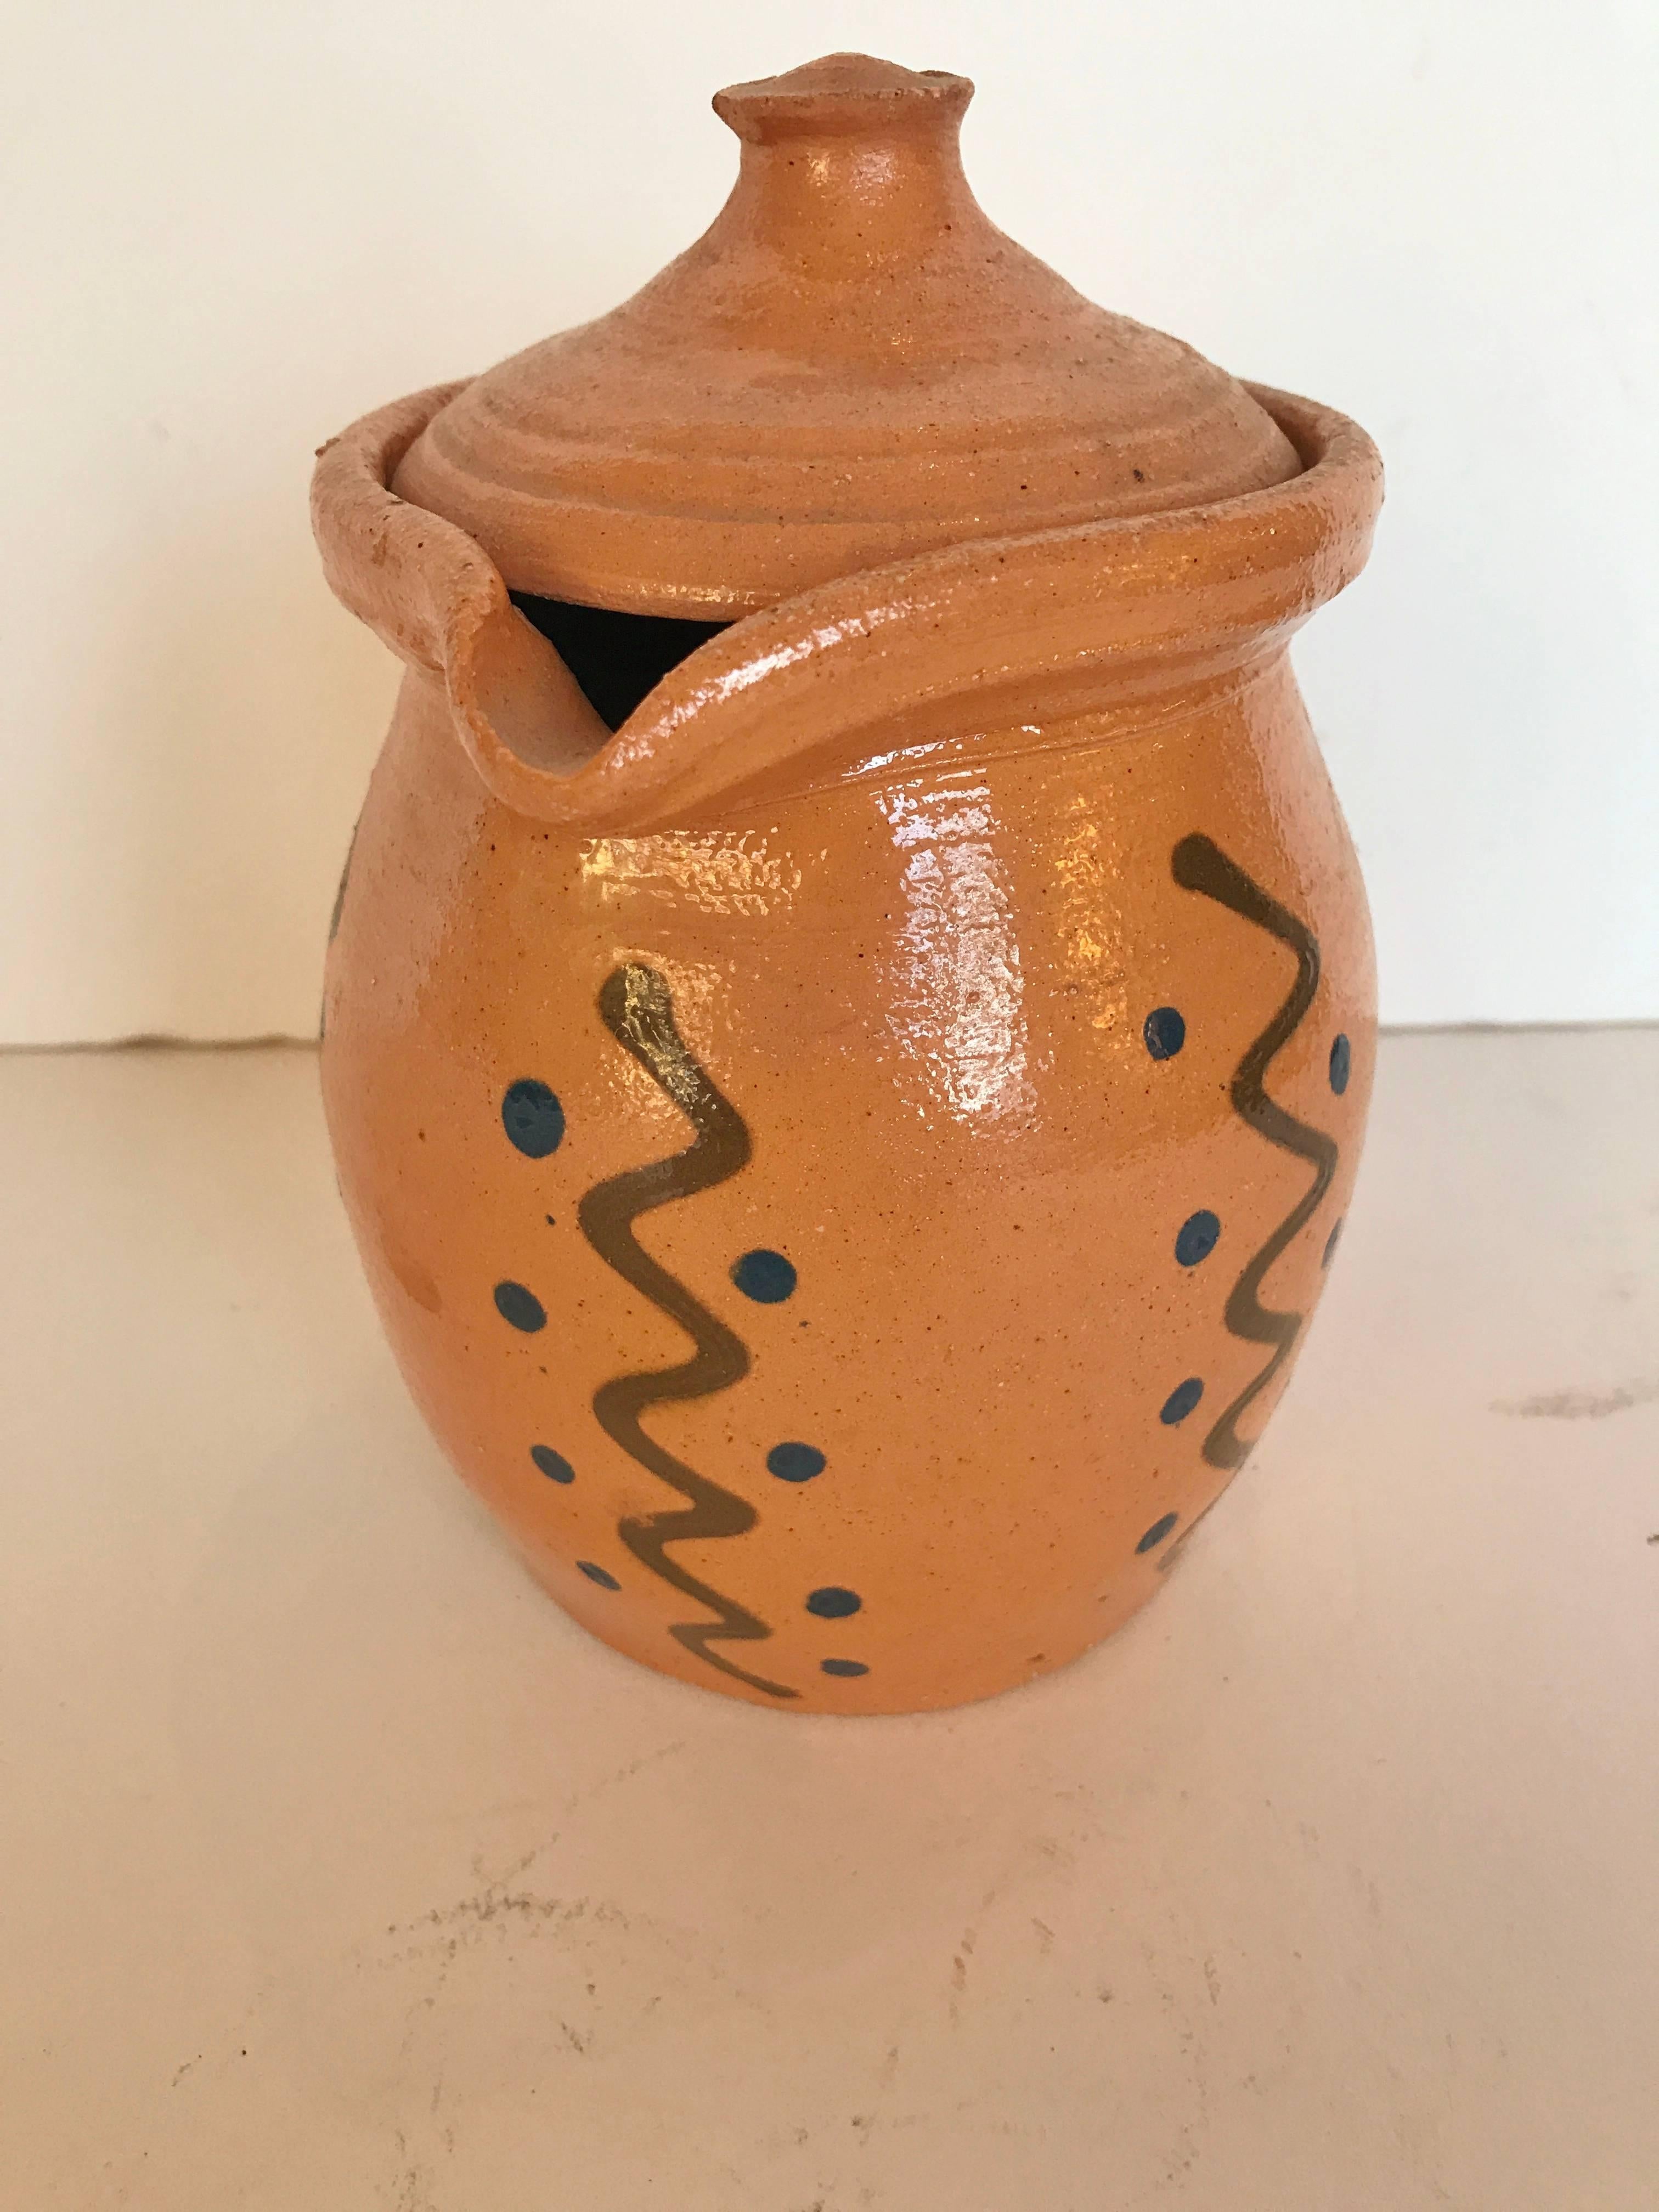 Vintage French Alsace pottery, pitcher with lid. Mustard color embellished with typical Alsace design of zig zags and dots. Very good condition, probably never used. French Folk Art.